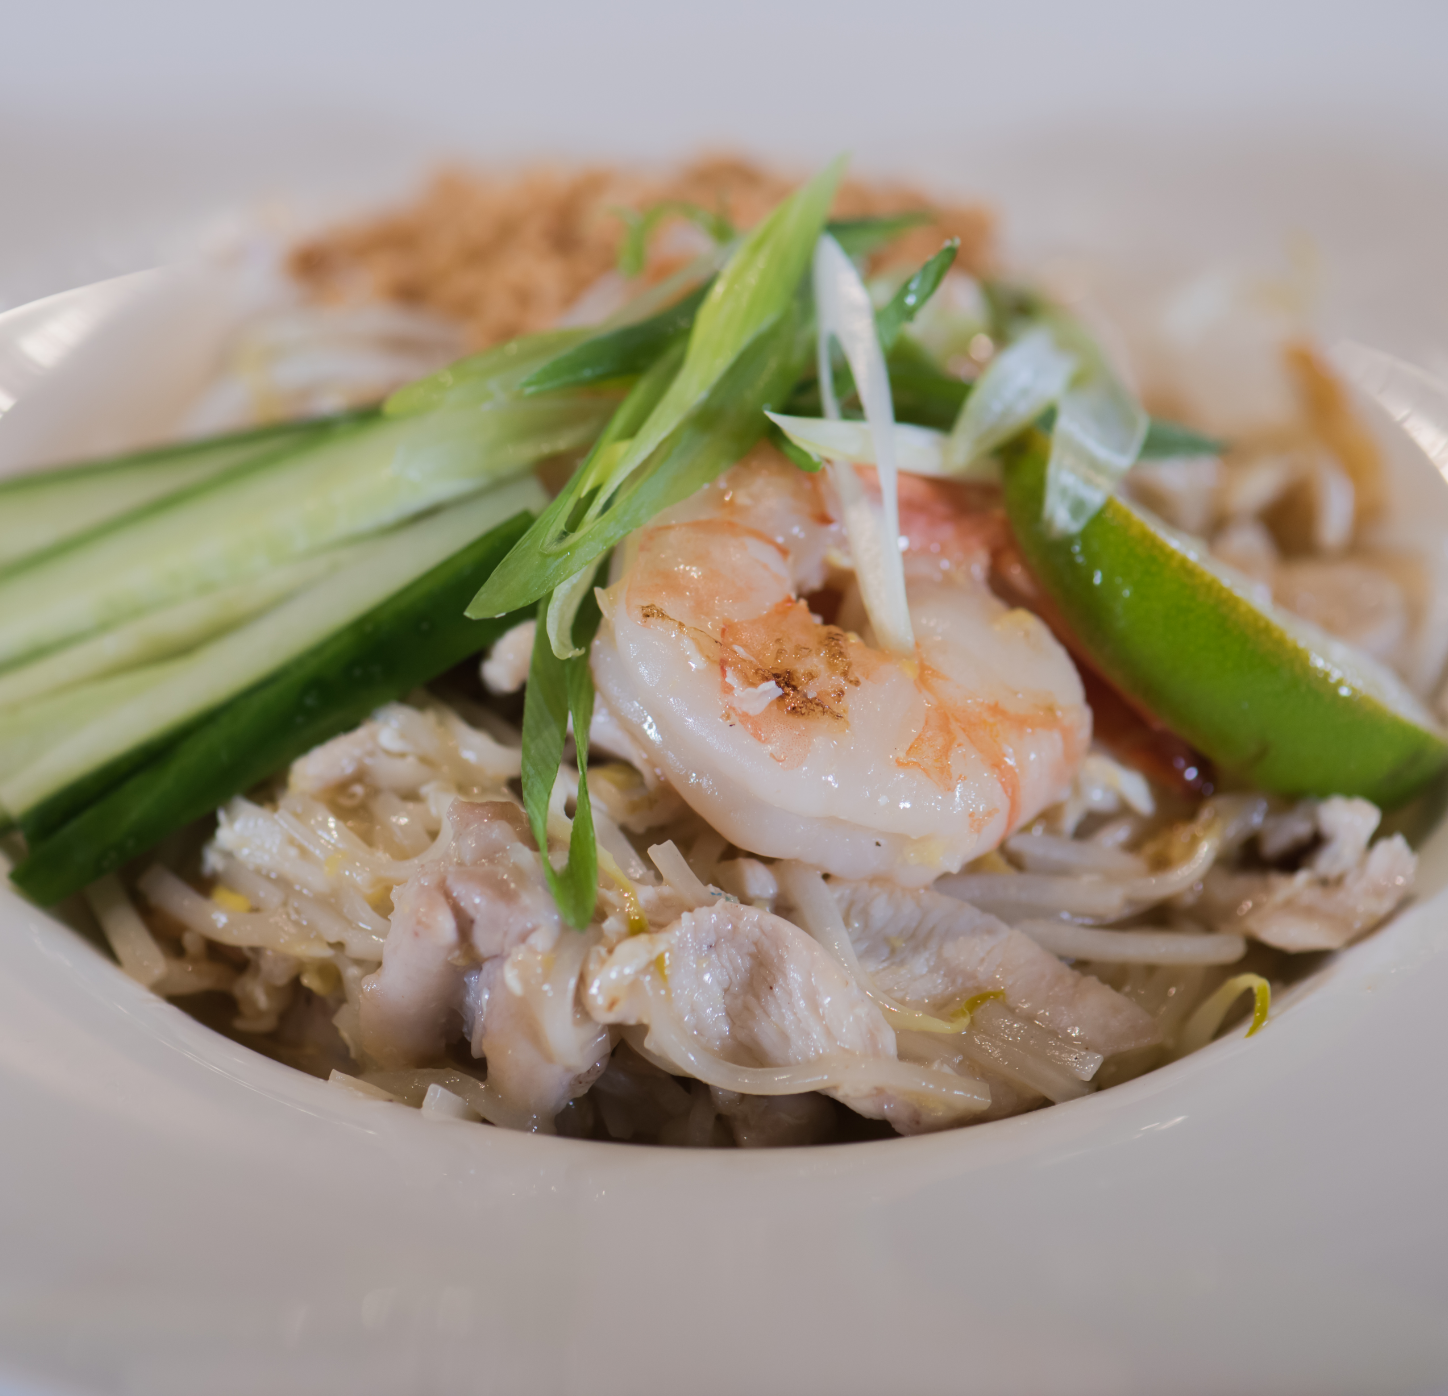 Upclose image of Chef Signaure Pad Thai prepared with house-made authentic sauce, stir-fried rice noodles, egg, preserved radish, tofu, bean sprouts, chicken and shrimp. Garnished with lime, cucumber and peanuts.